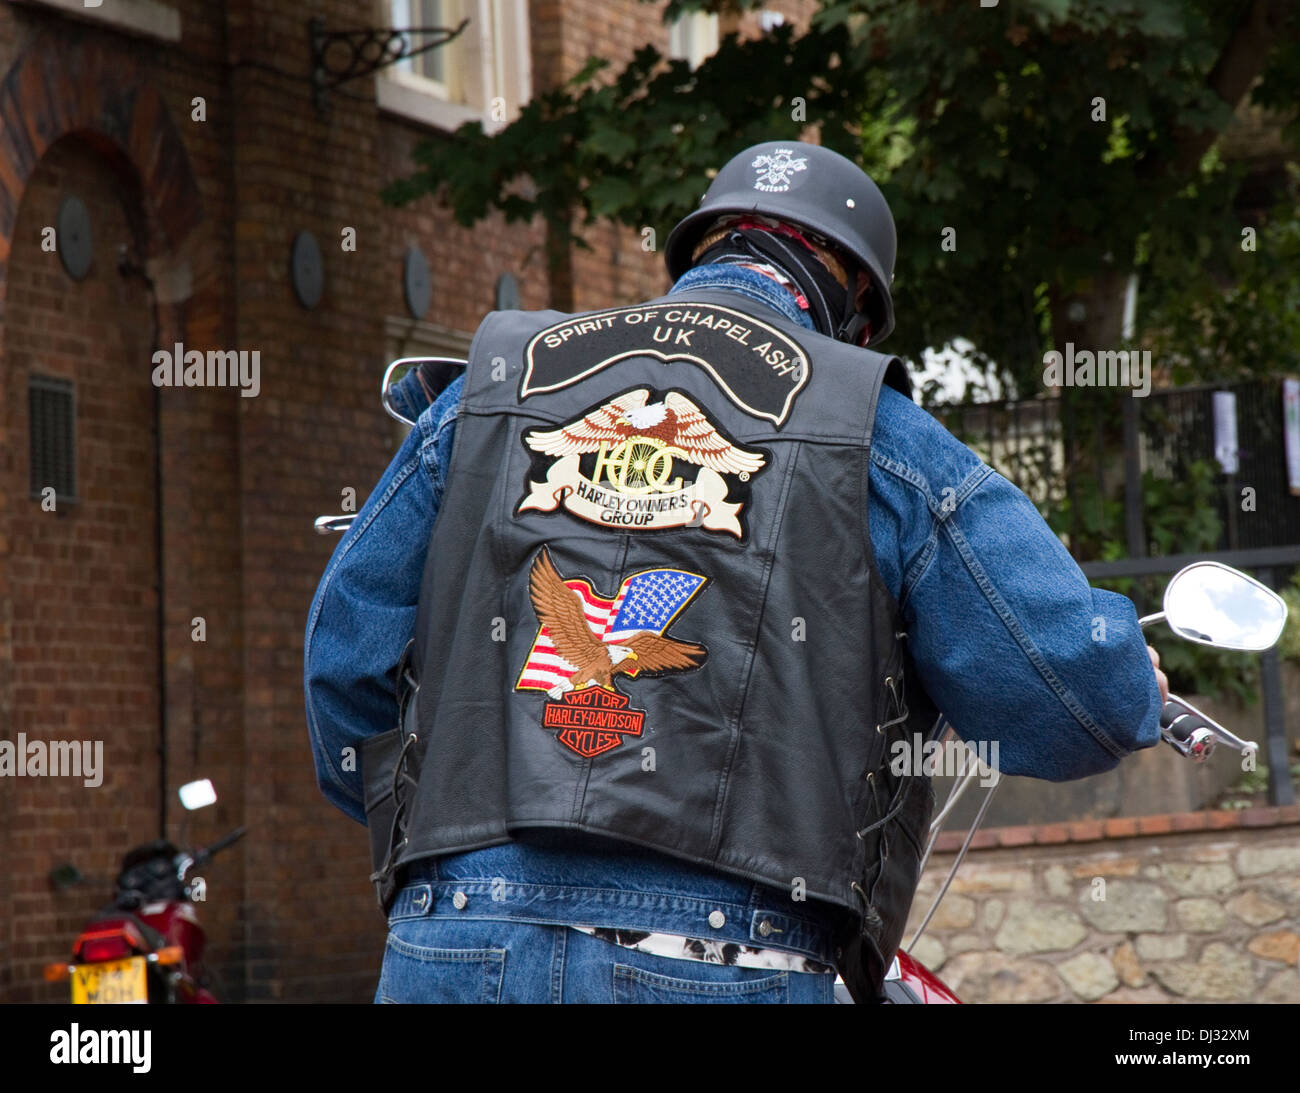 Harley Davidson Motorcycle Uk High Resolution Stock Photography And Images Alamy